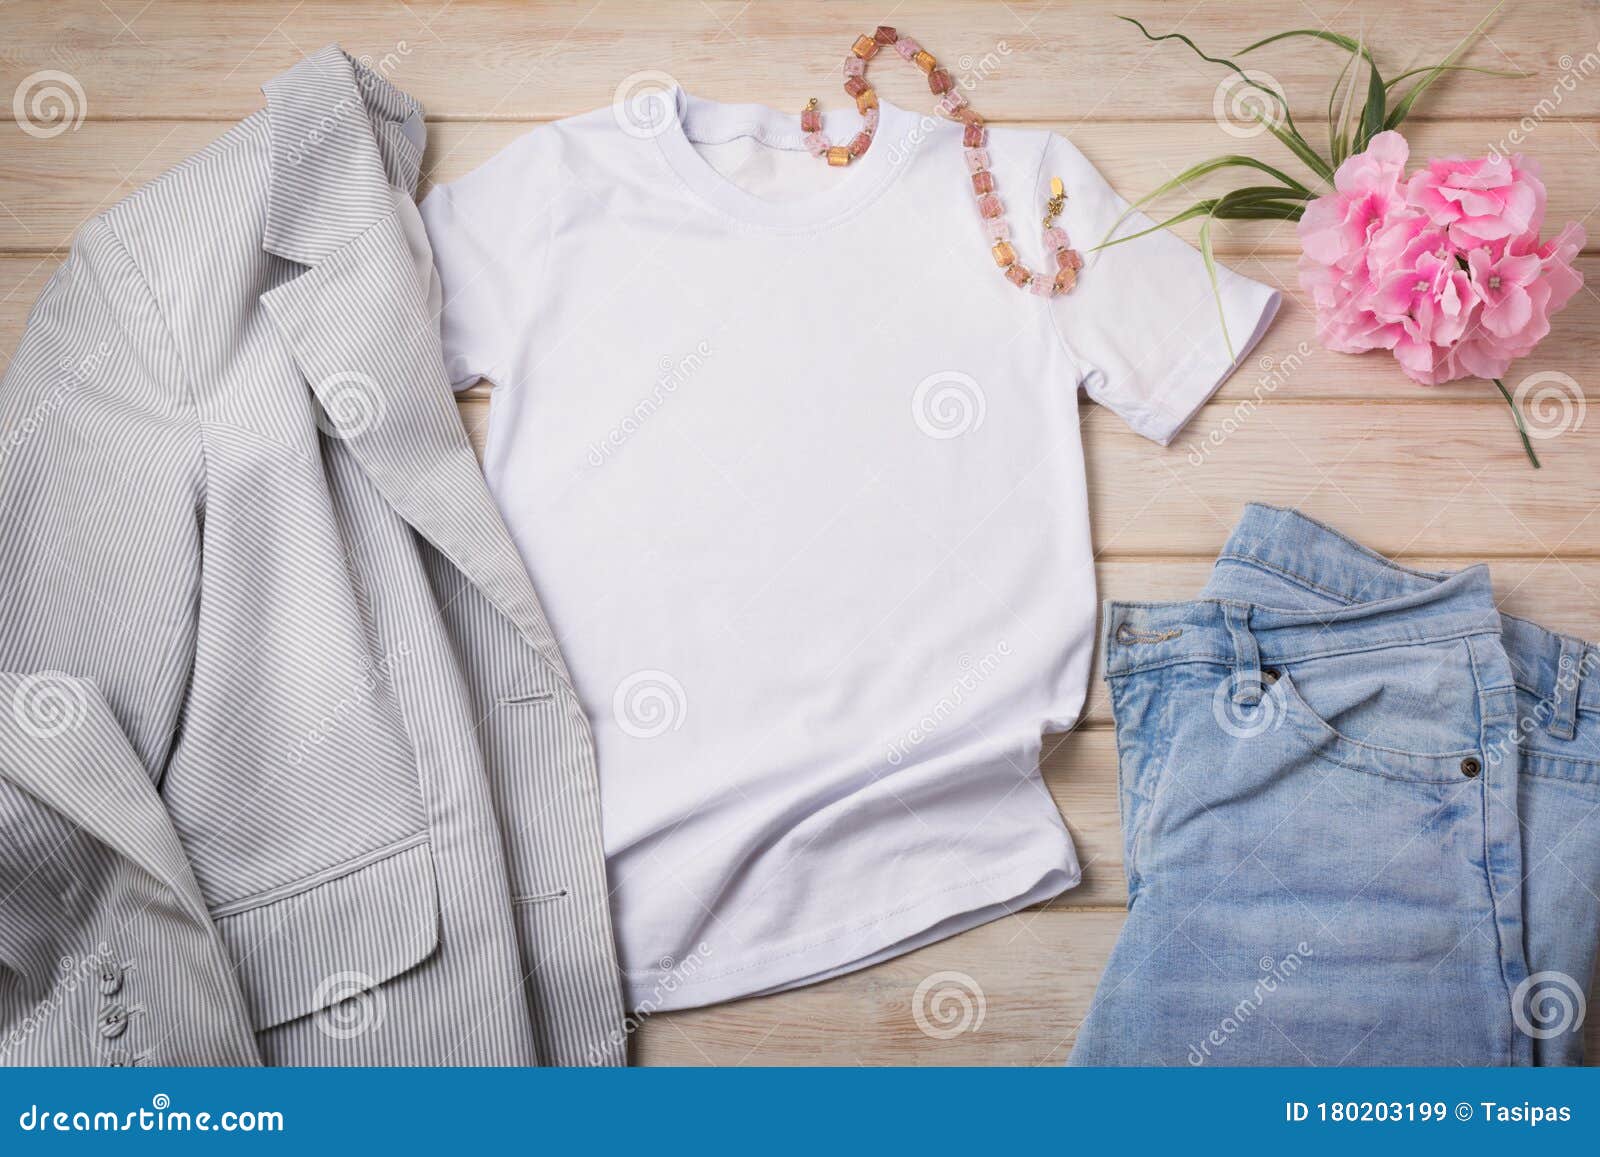 Download Women T Shirt Mockup With Jeans And Striped Blazer Stock Image Image Of Mock Girl 180203199